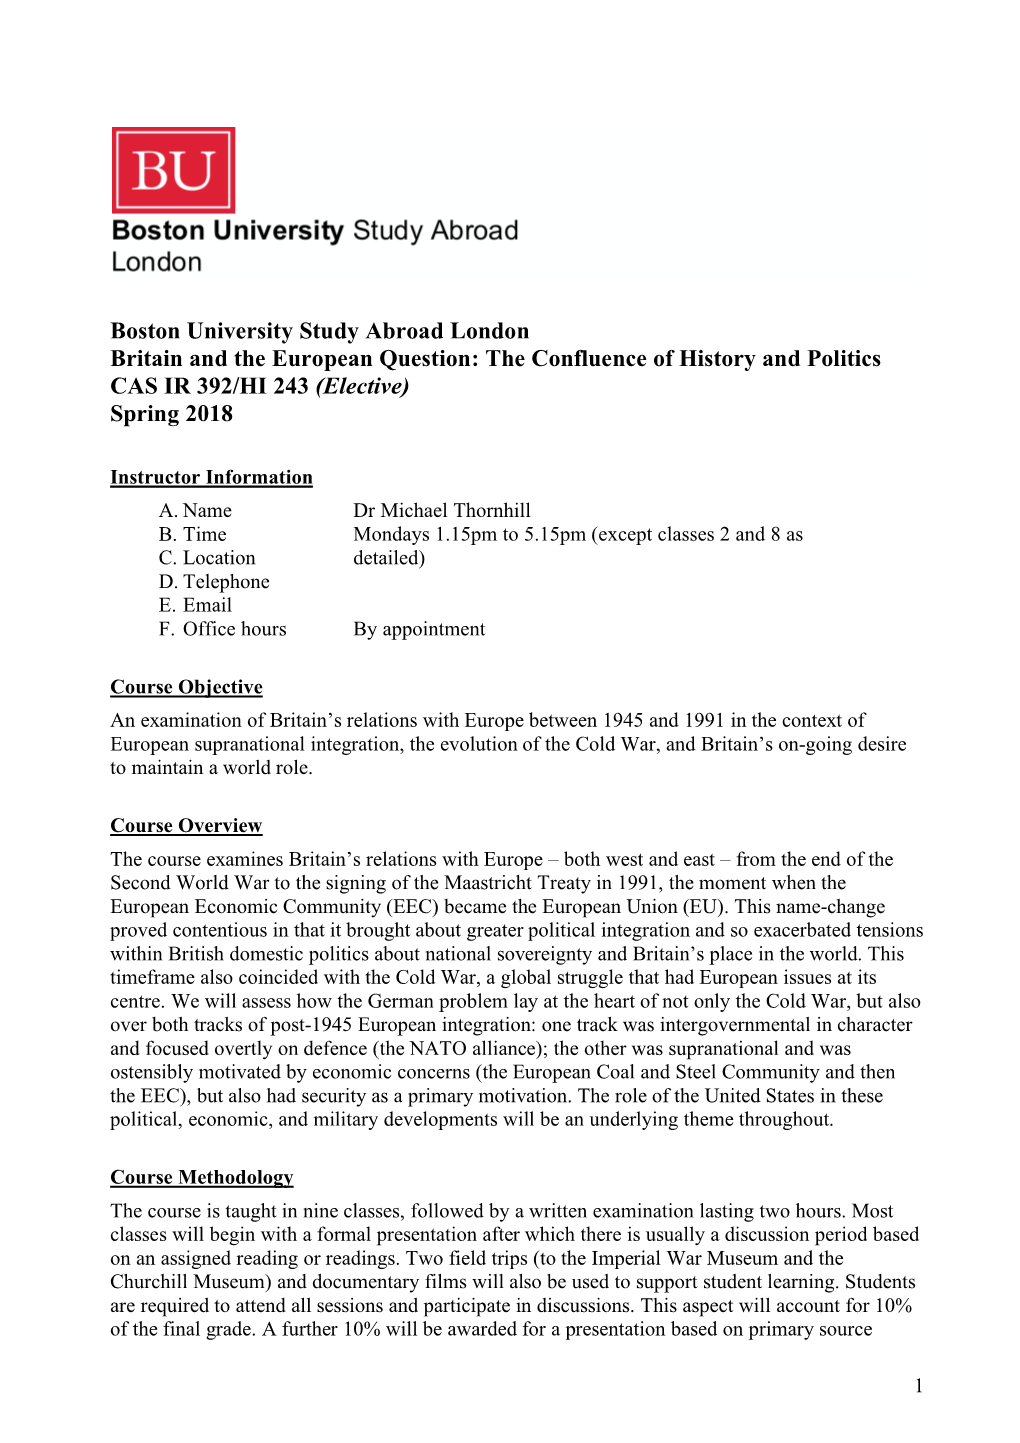 Boston University Study Abroad London Britain and the European Question: the Confluence of History and Politics CAS IR 392/HI 243 (Elective) Spring 2018